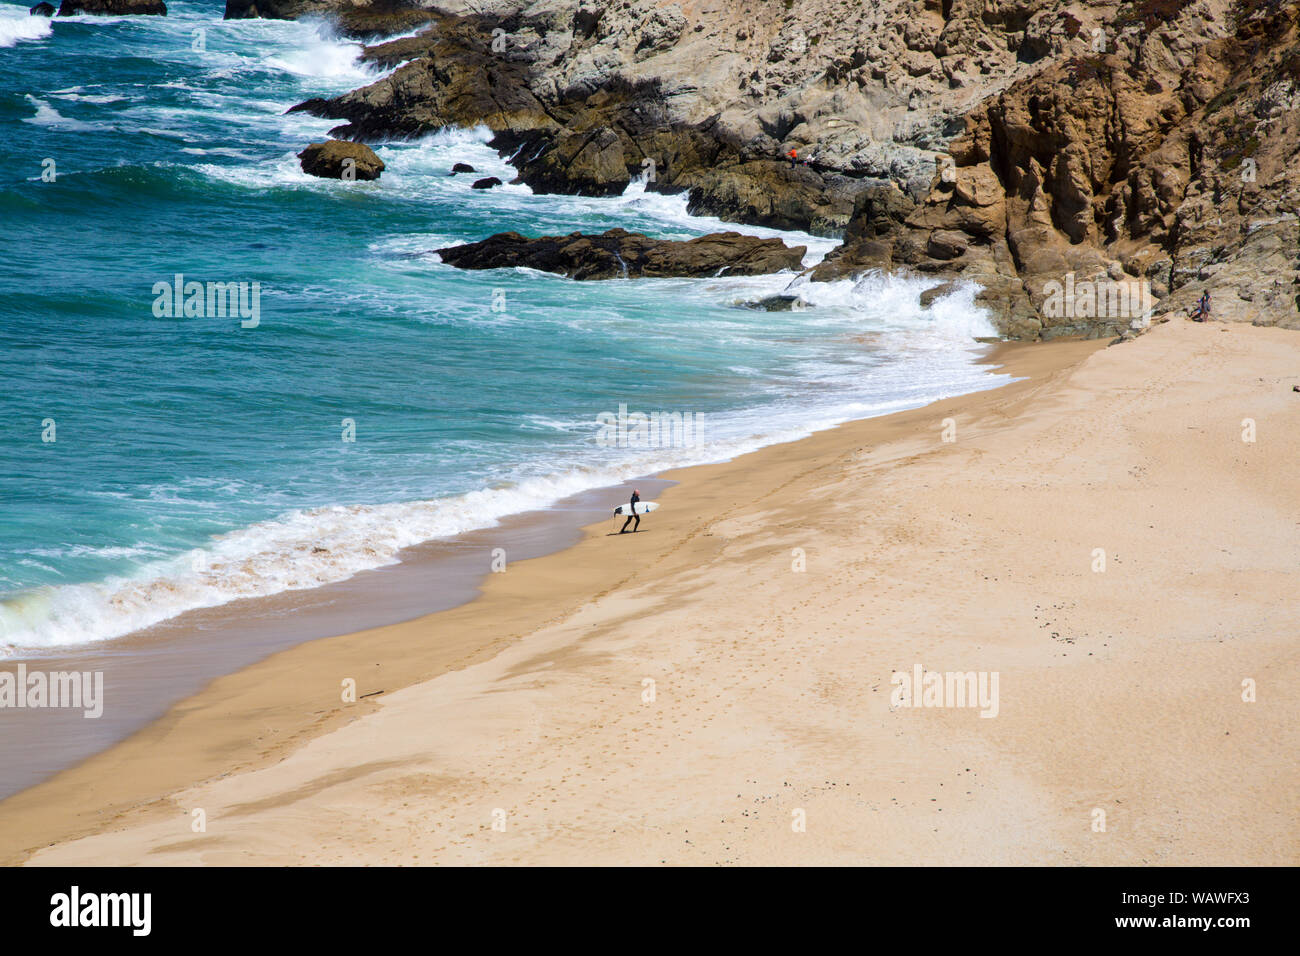 A surfer on the coast of northern California between Sasn Francisco and Monterrey. Stock Photo